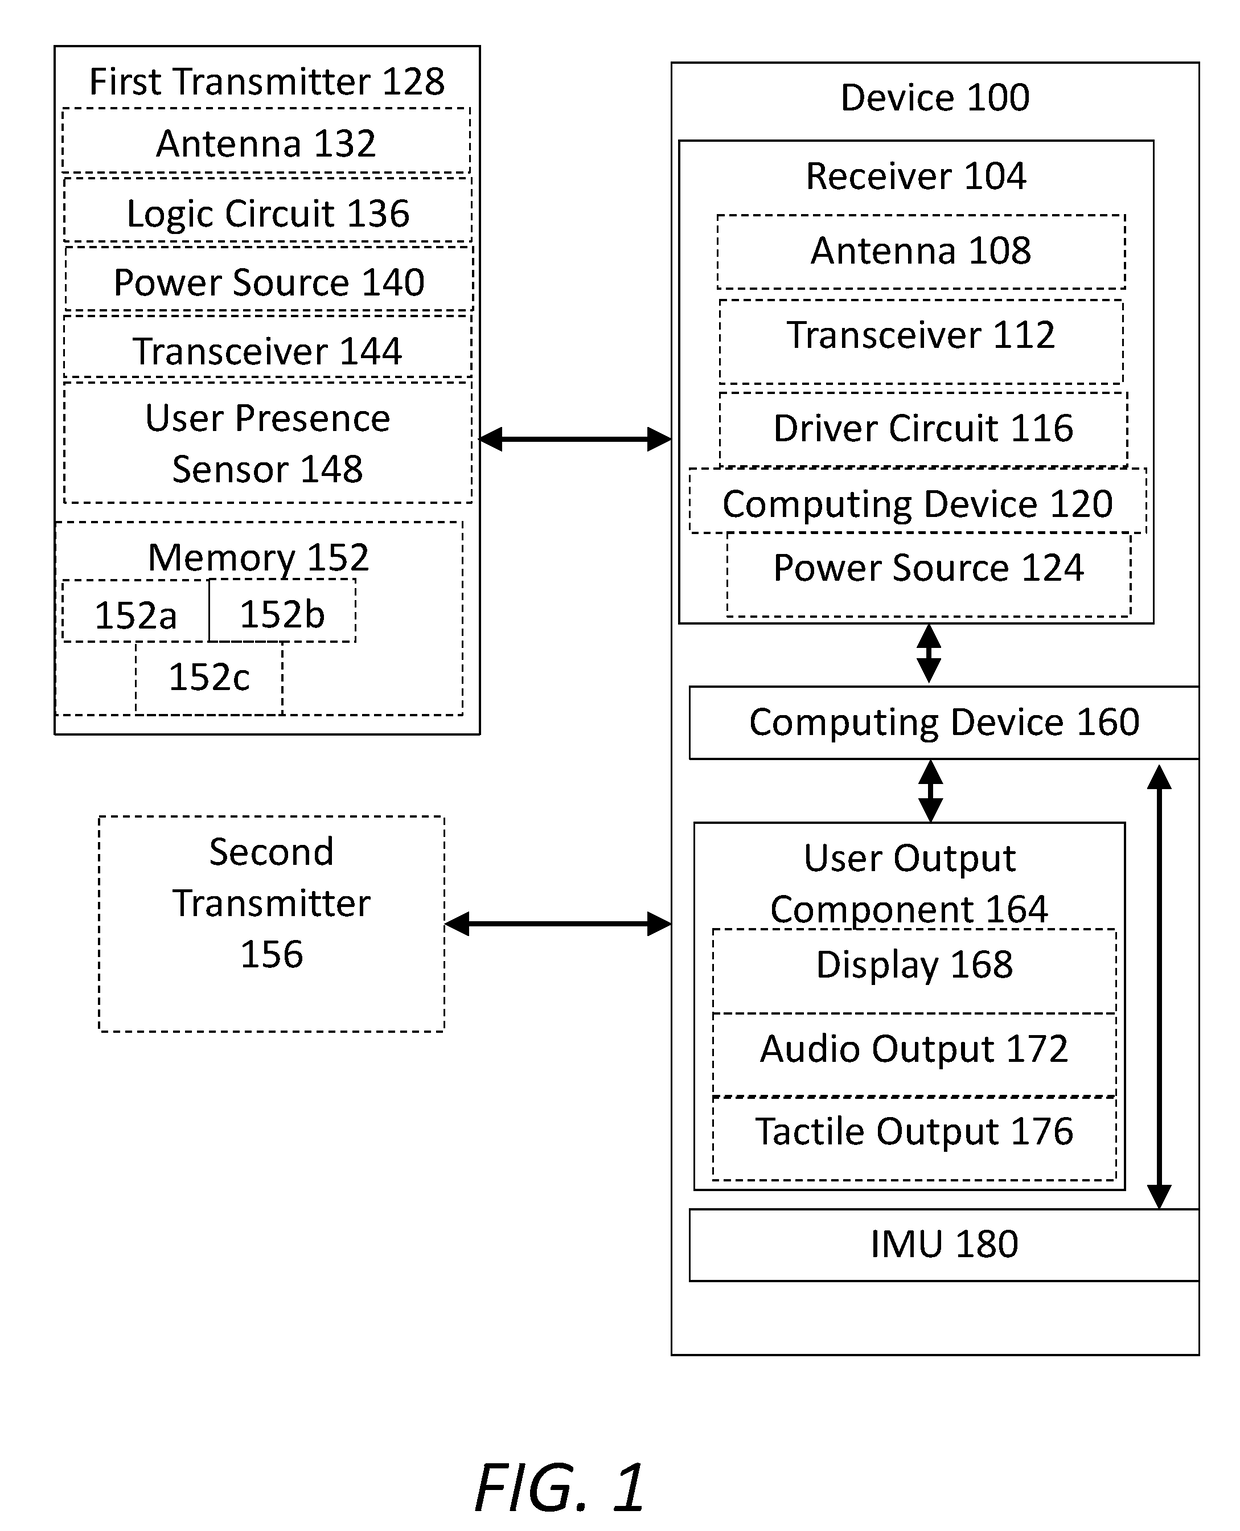 Devices, systems, and methods for navigation and usage guidance in a navigable space using wireless communication